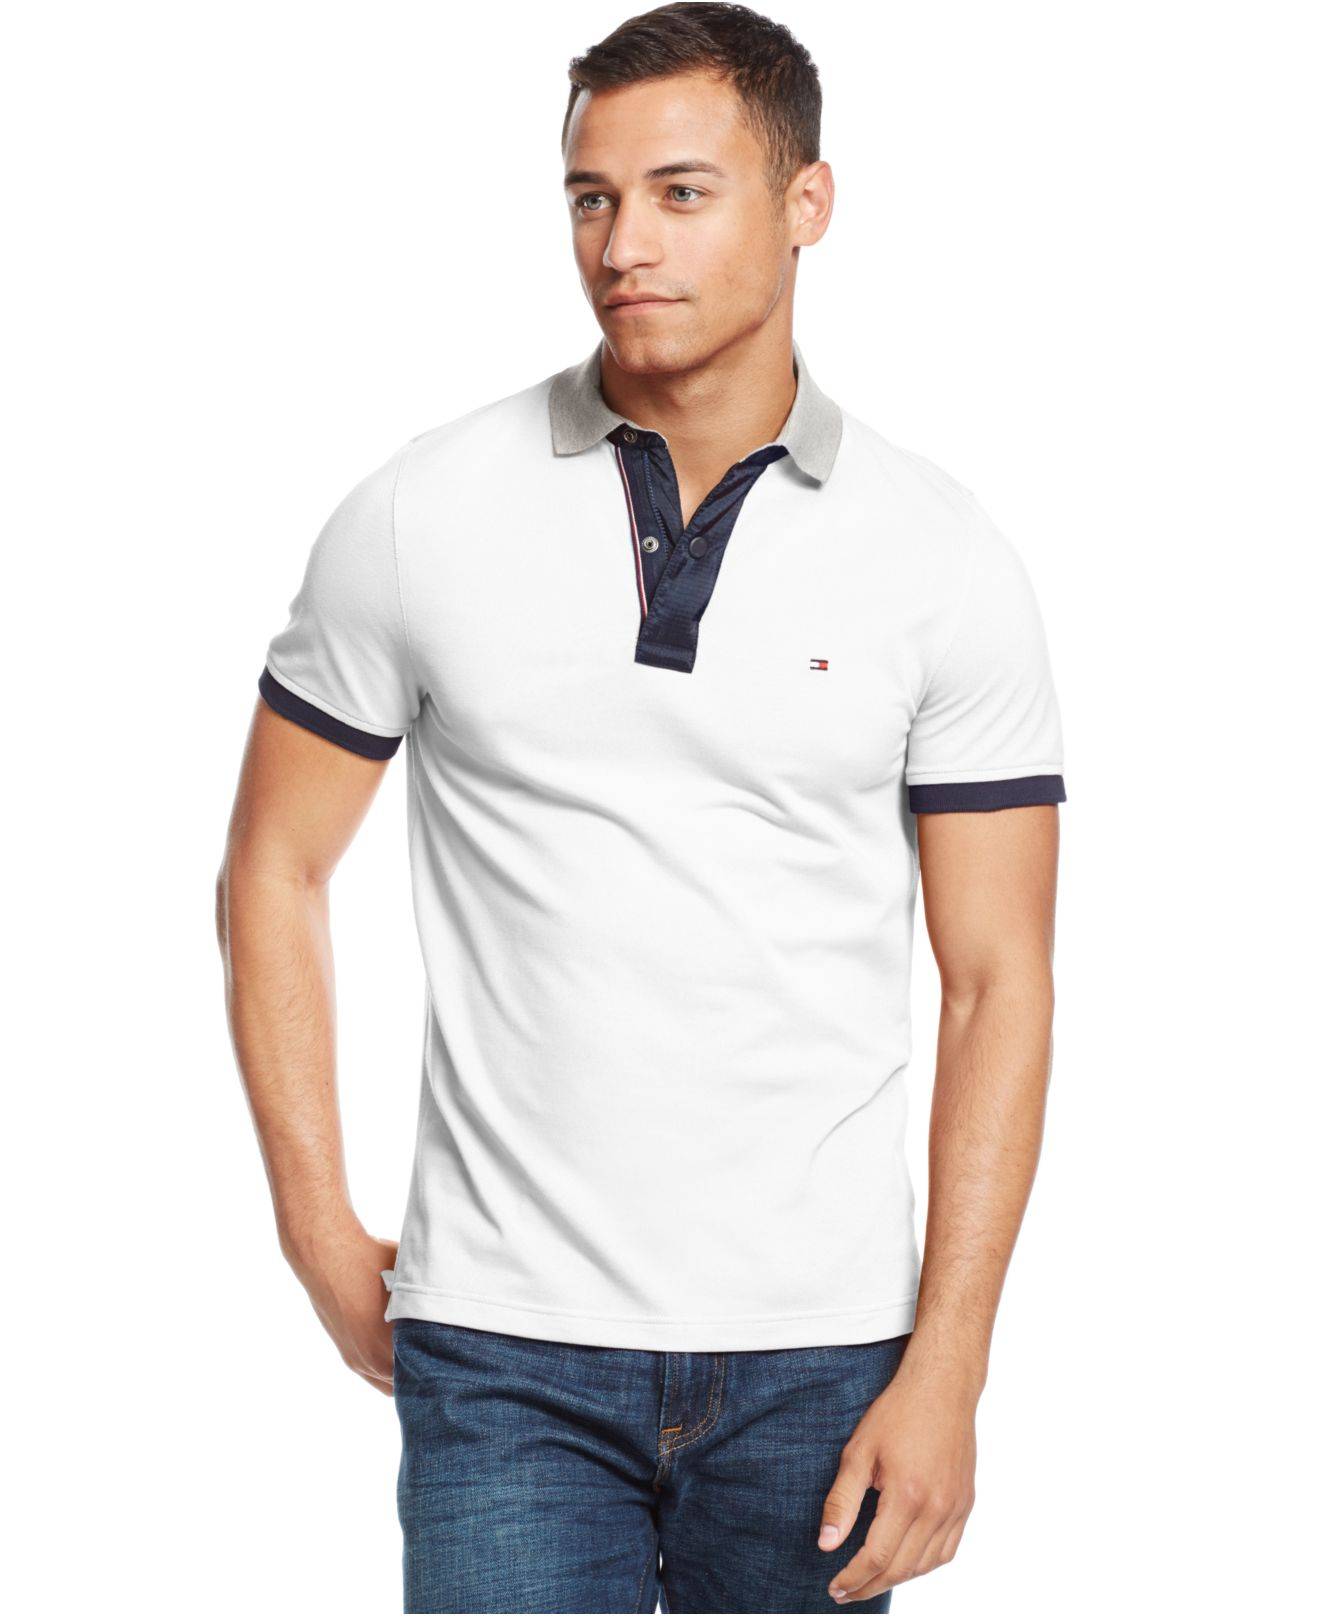 Lyst - Tommy Hilfiger Bailey Custom-fit Performance Polo in White for Men